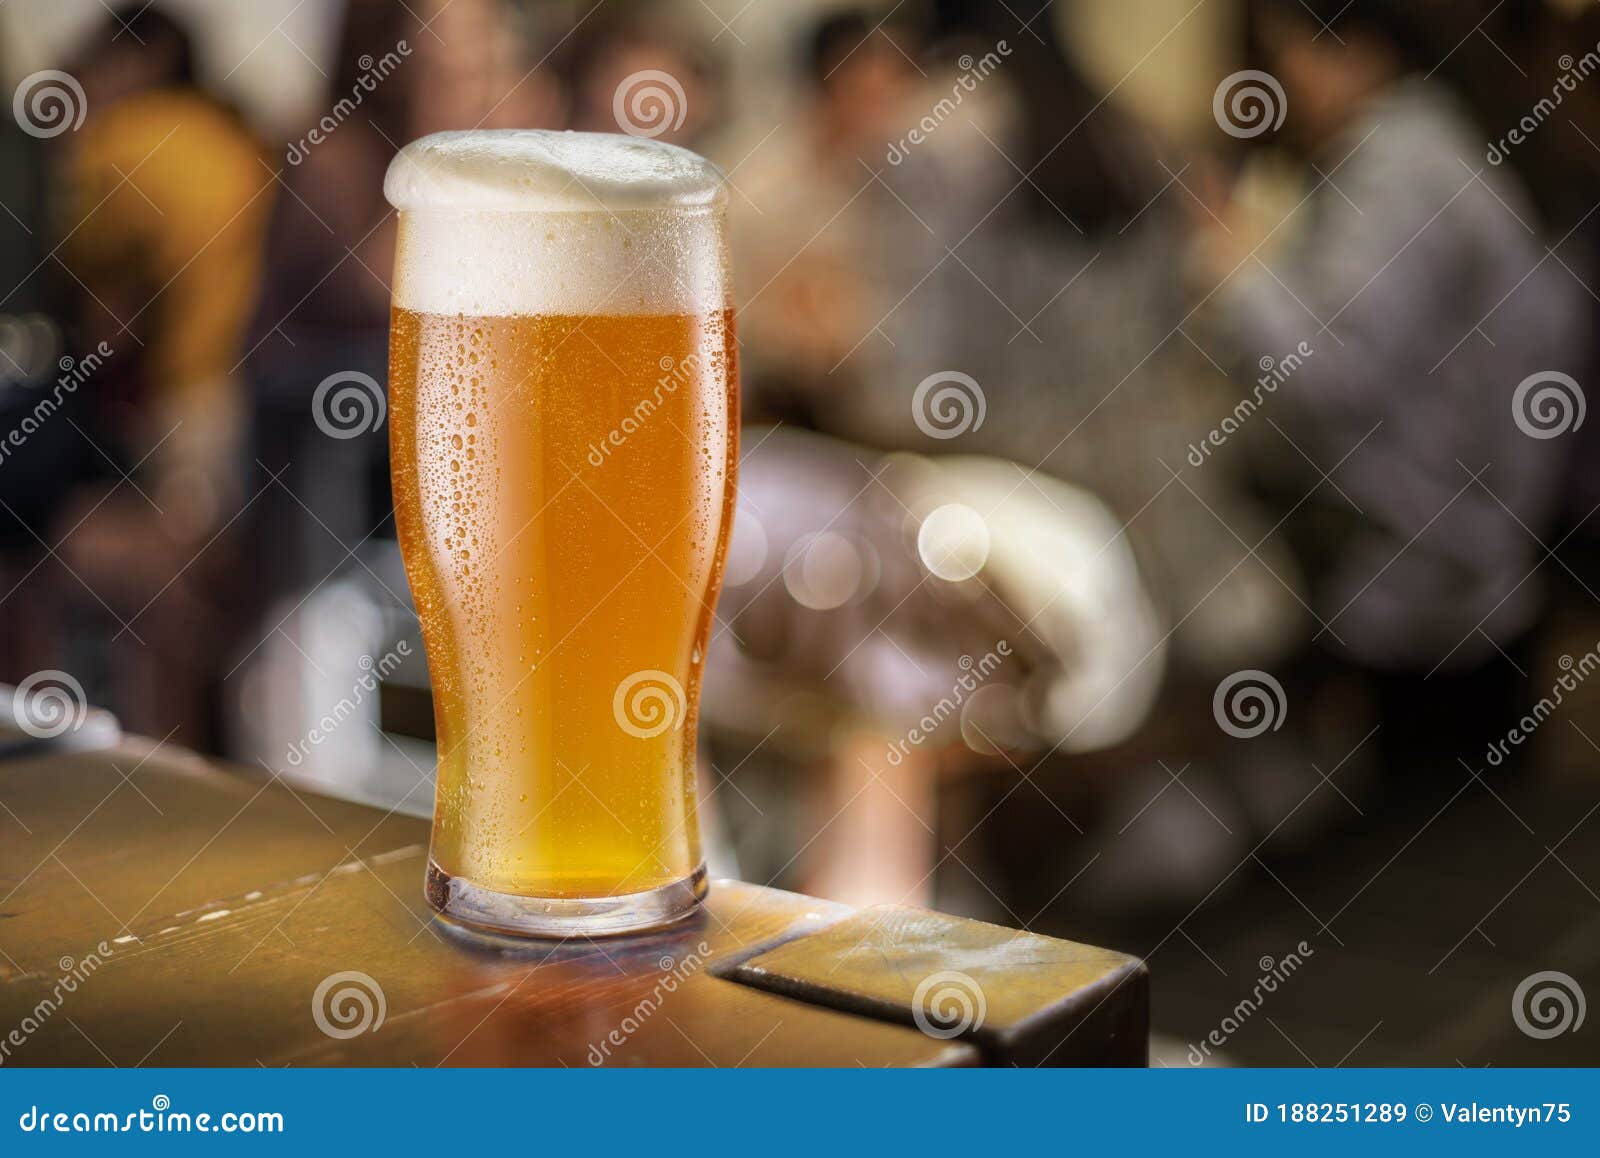 glass of unfiltered beer stands on a table in a pub